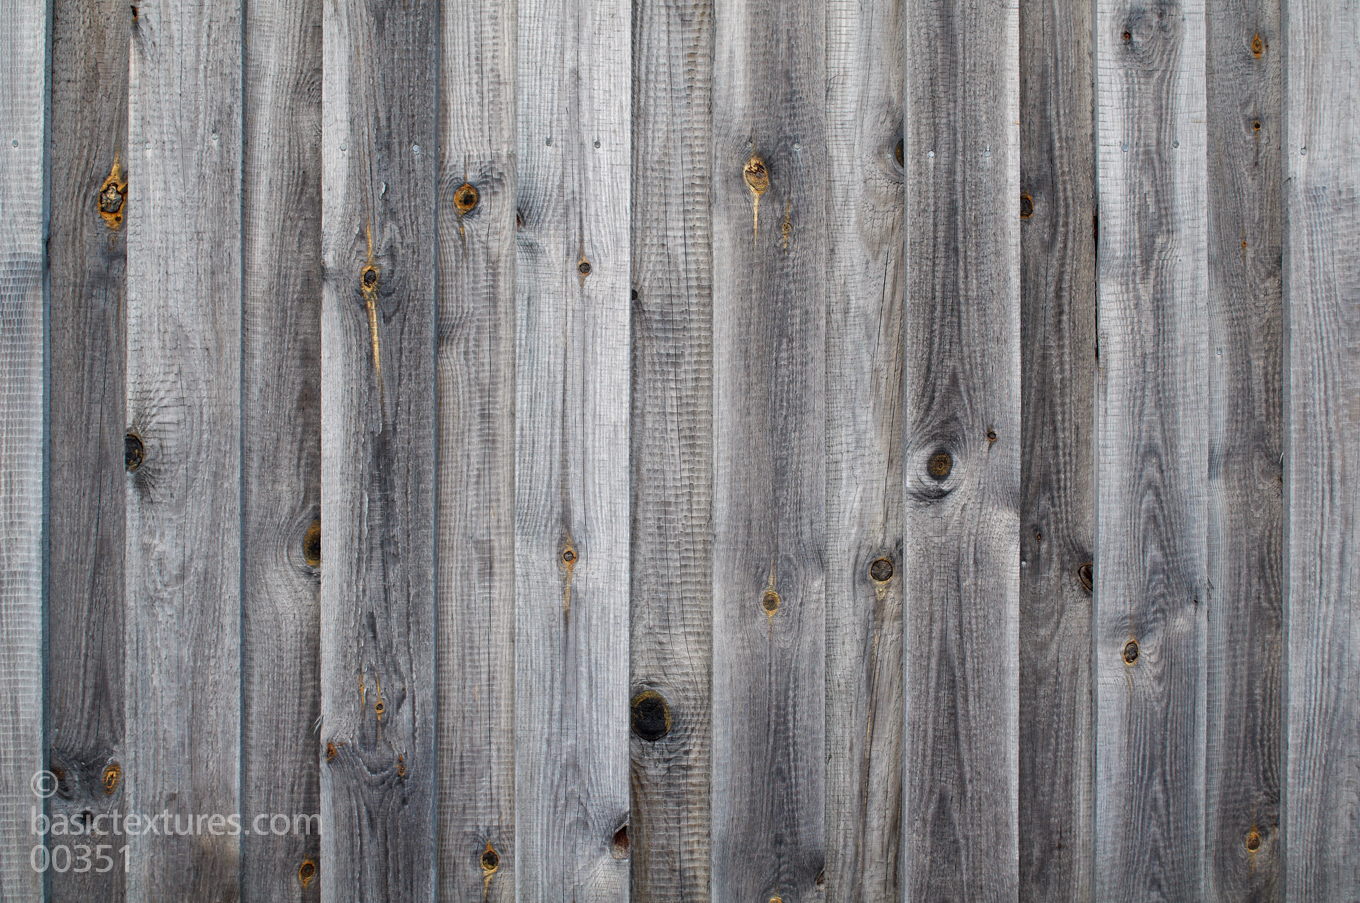 Wood Planks Wall Raw Weathered Gray Image For Textures